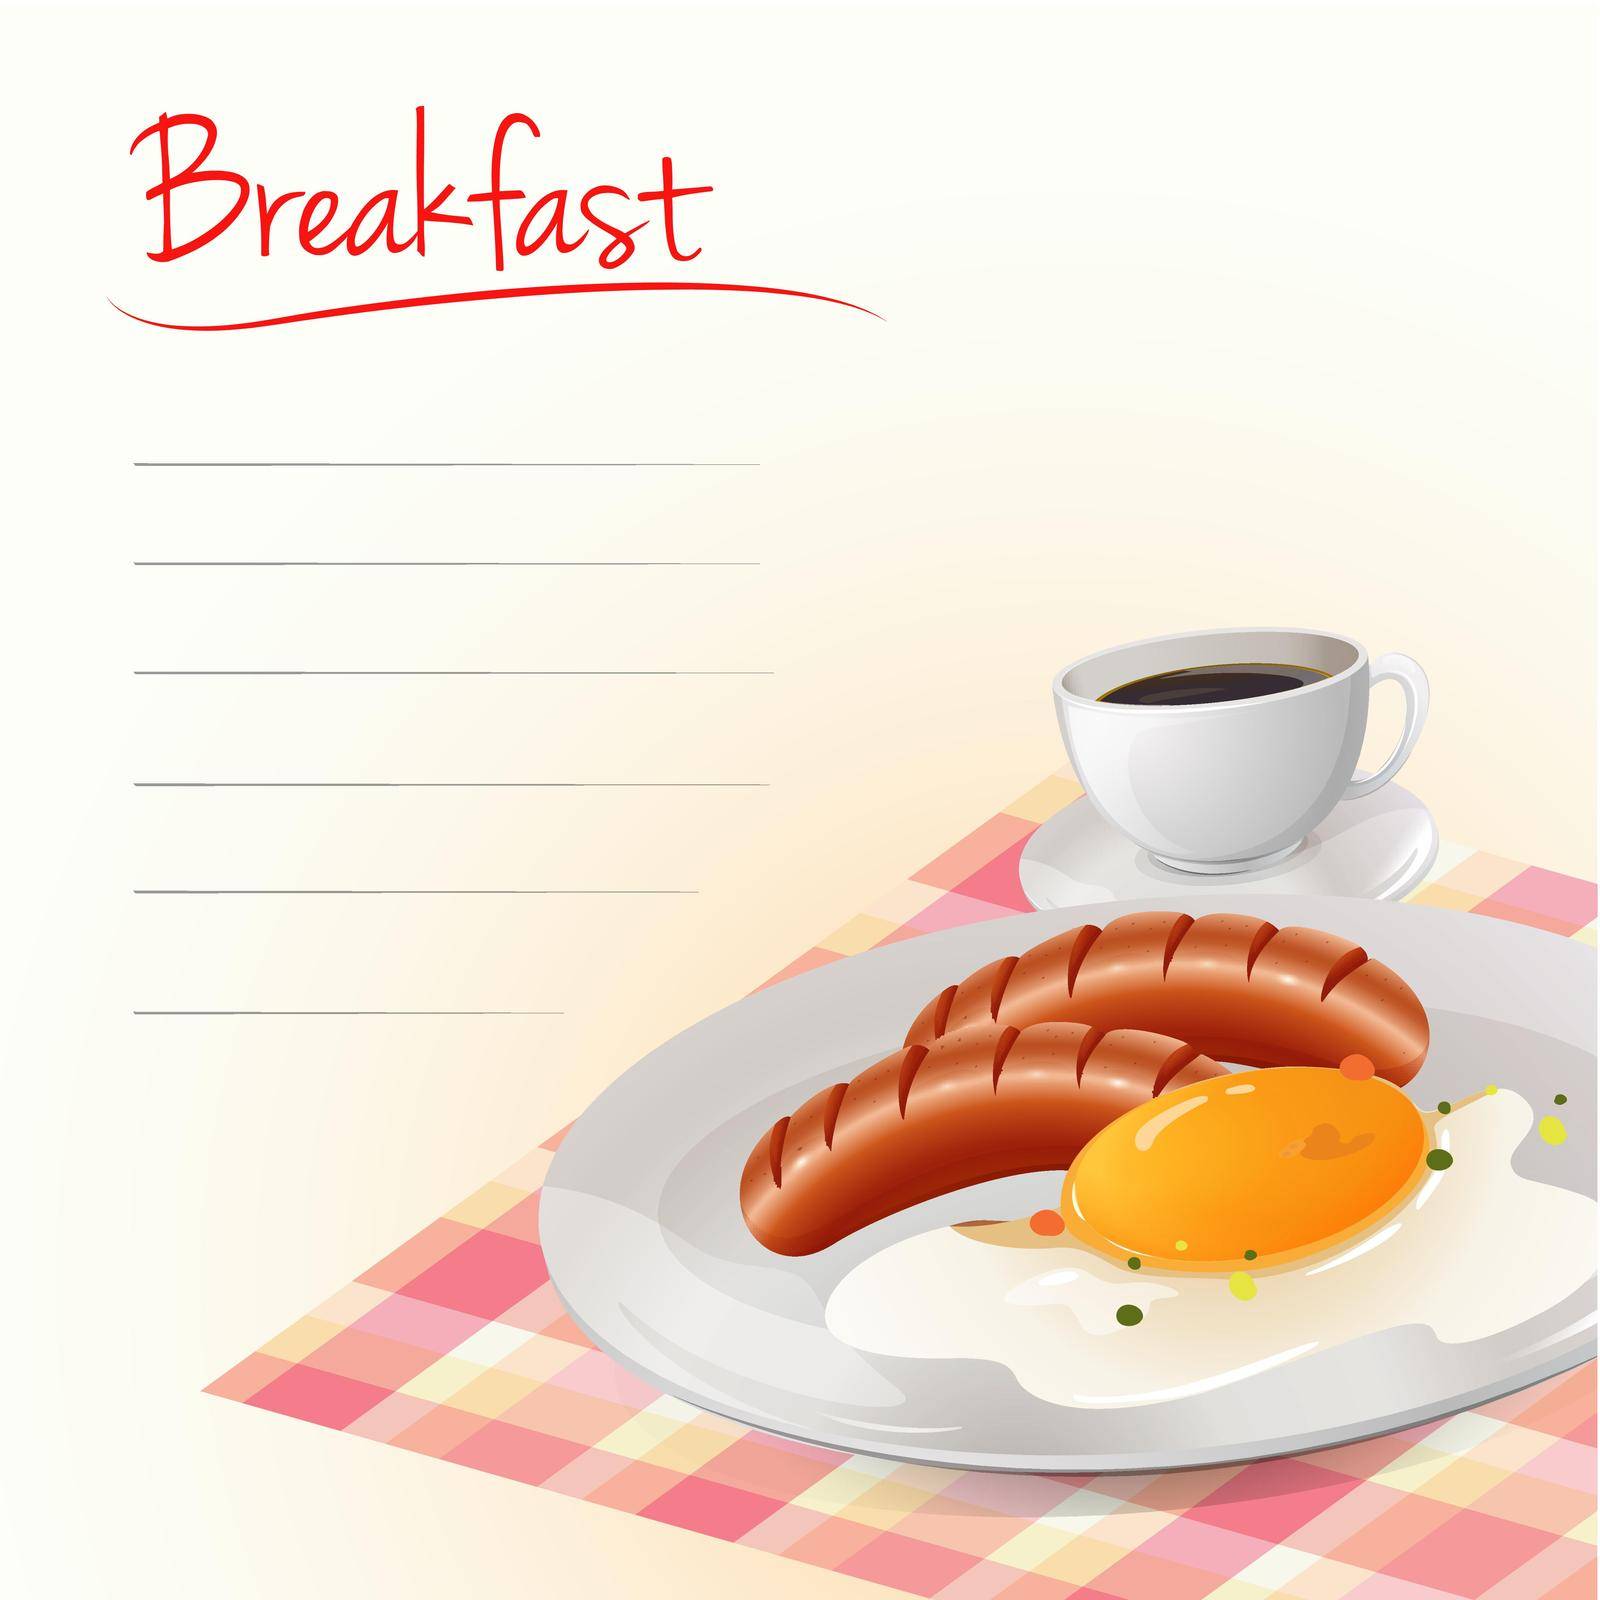 Breakfast with eggs and coffee illustration